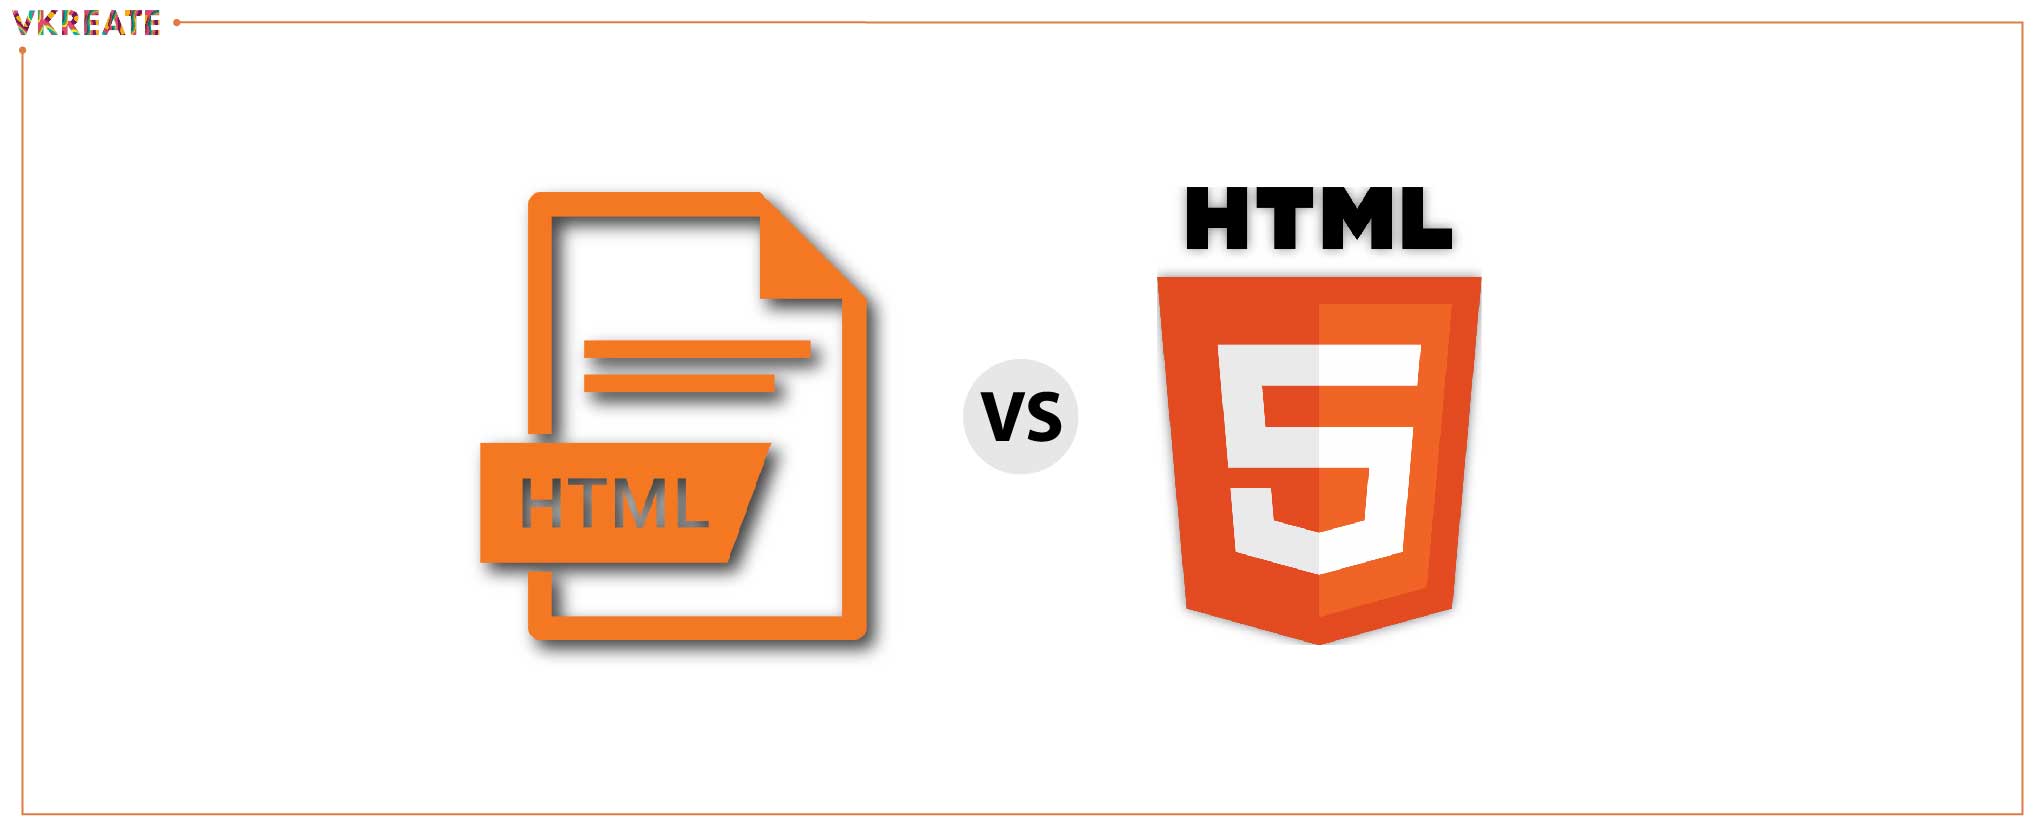 Difference Between HTML and HTMl5 - The Complete Guide